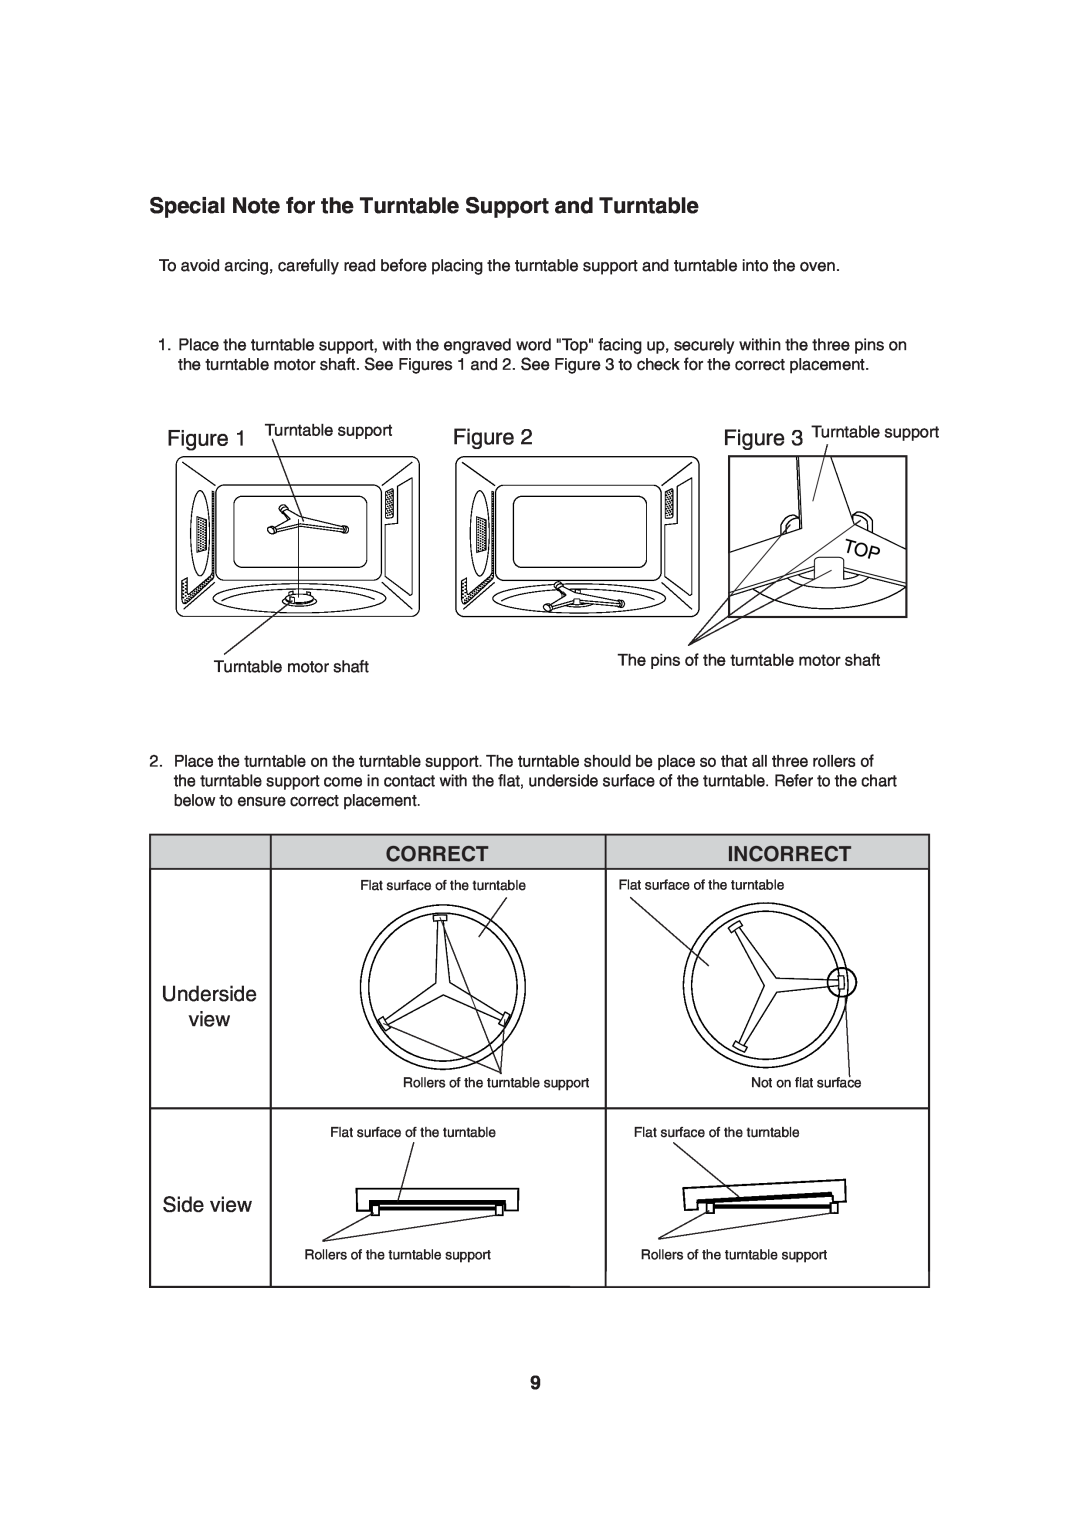 Sharp R-930CS, R-930AK, R-930AW operation manual Special Note for the Turntable Support and Turntable, Correct, Incorrect 